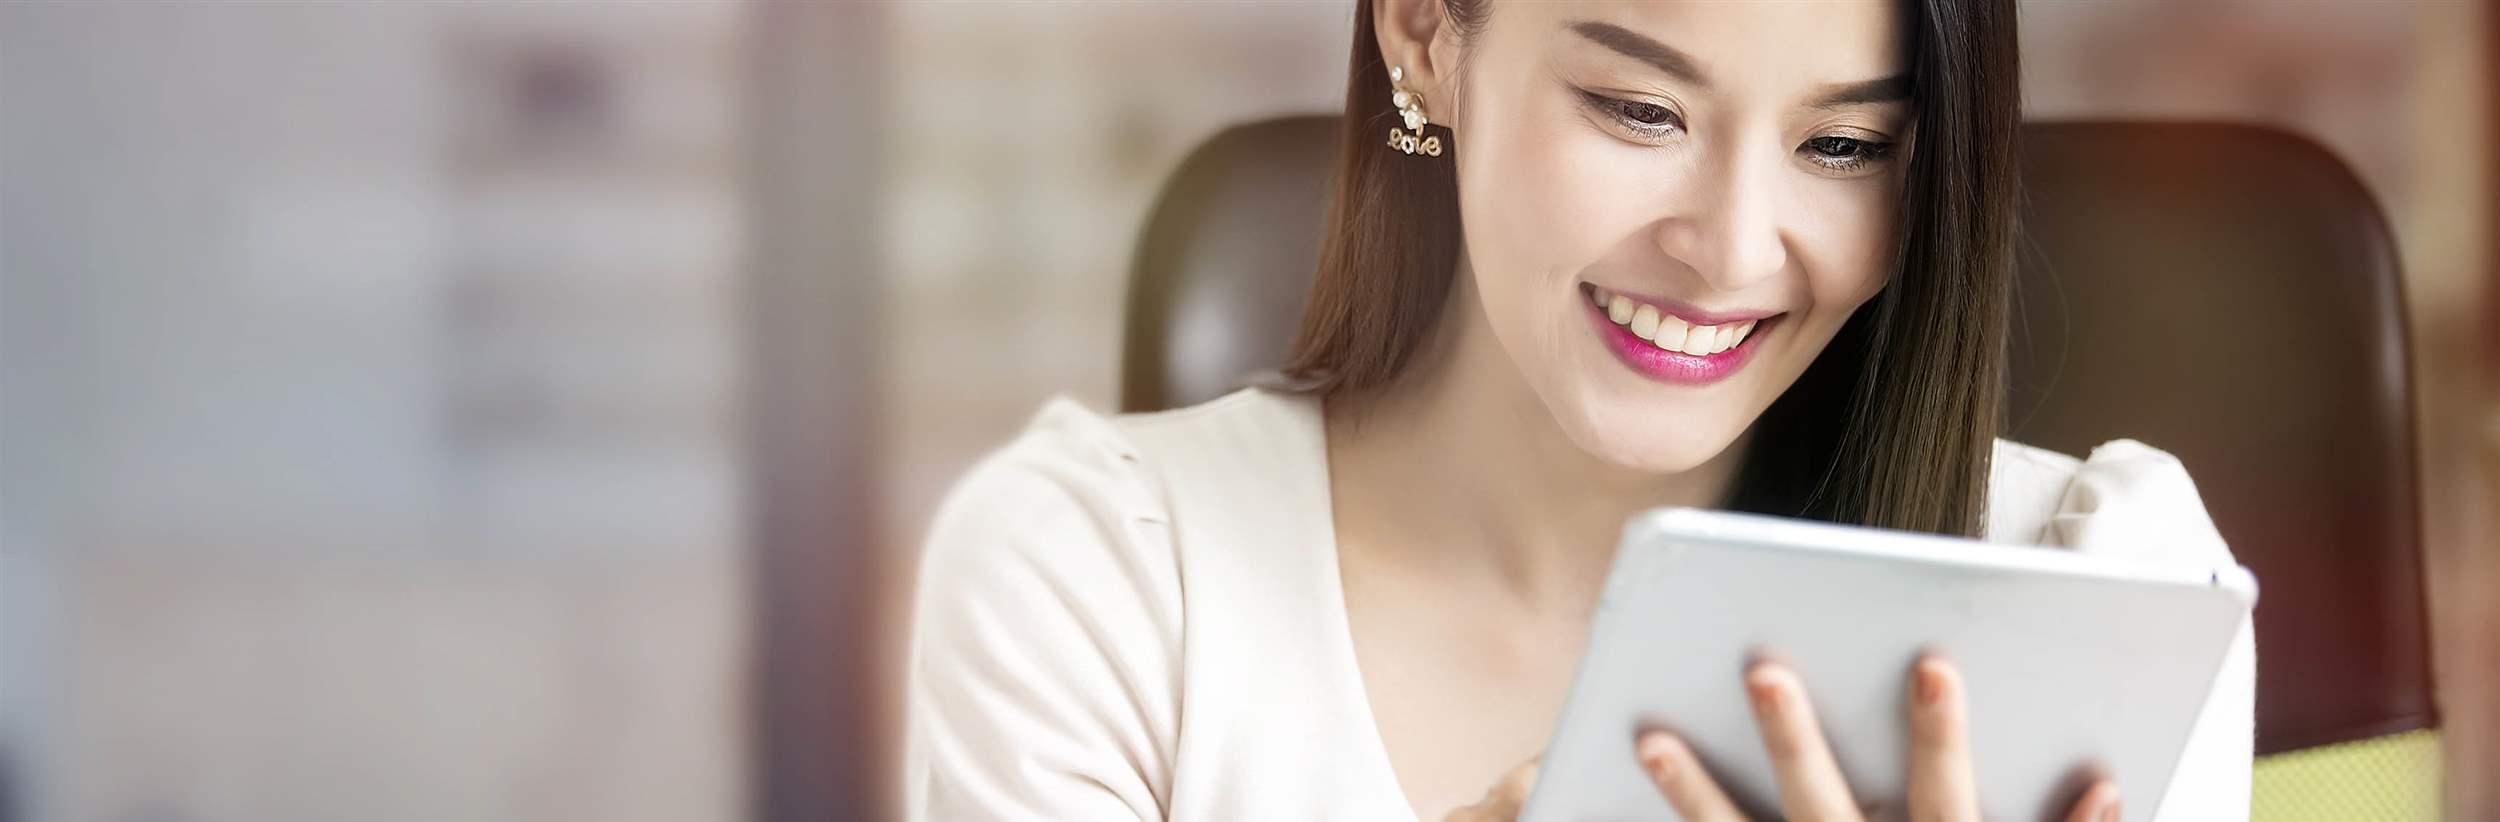 Beautiful woman smiling and using tablet while sitting at office desk.